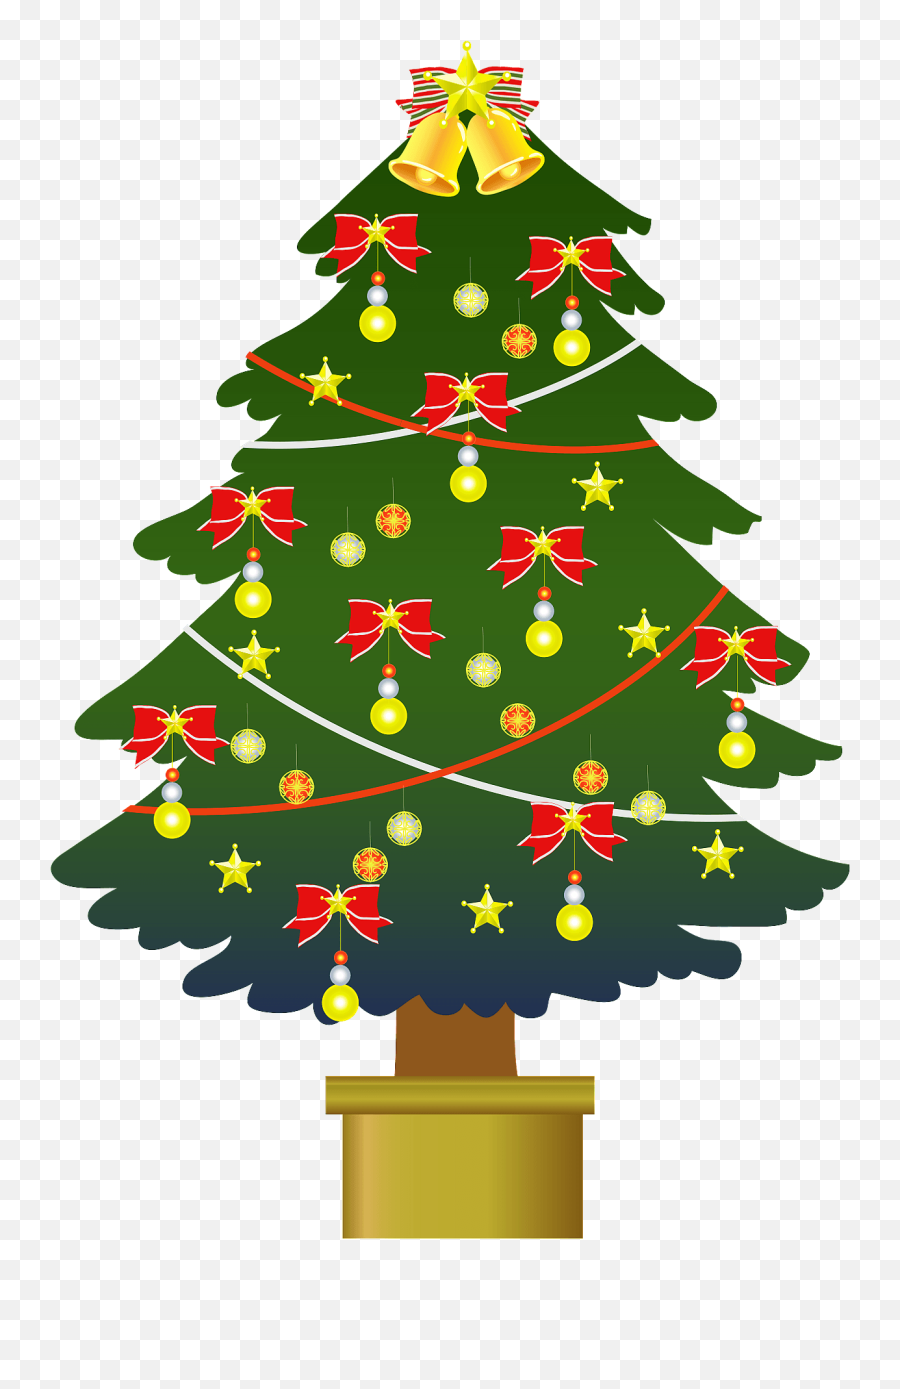 Christmas Tree Clipart Free Download Transparent Png Emoji,Christmas Trees Clipart